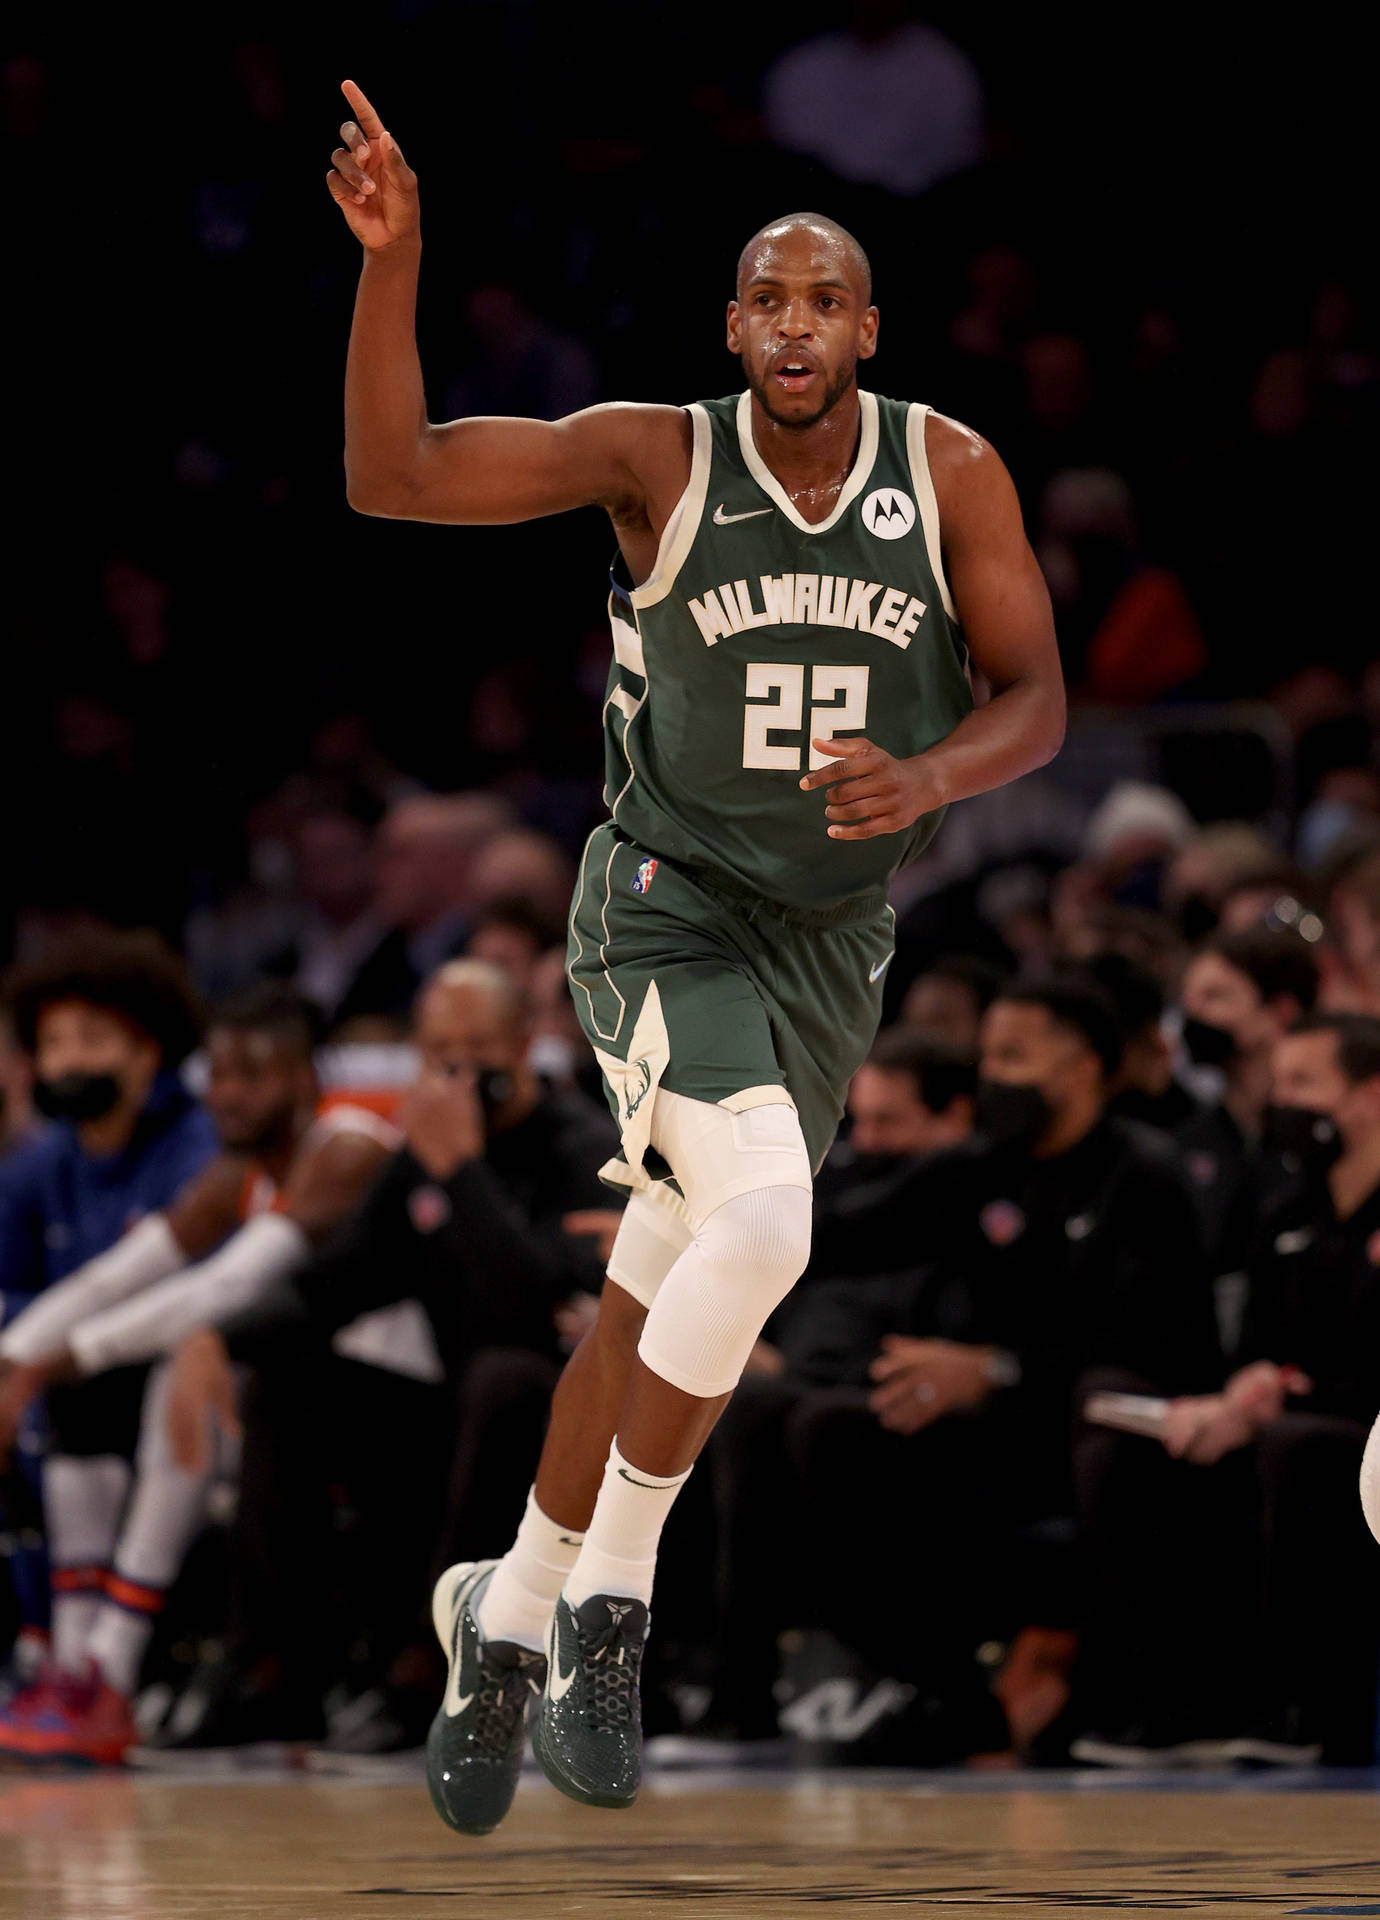 Attraktivnba Khris Middleton (this Is A Direct Translation As The Original Sentence Is Already In English And Does Not Require Translation, But If Necessary, It Can Be Rephrased As 